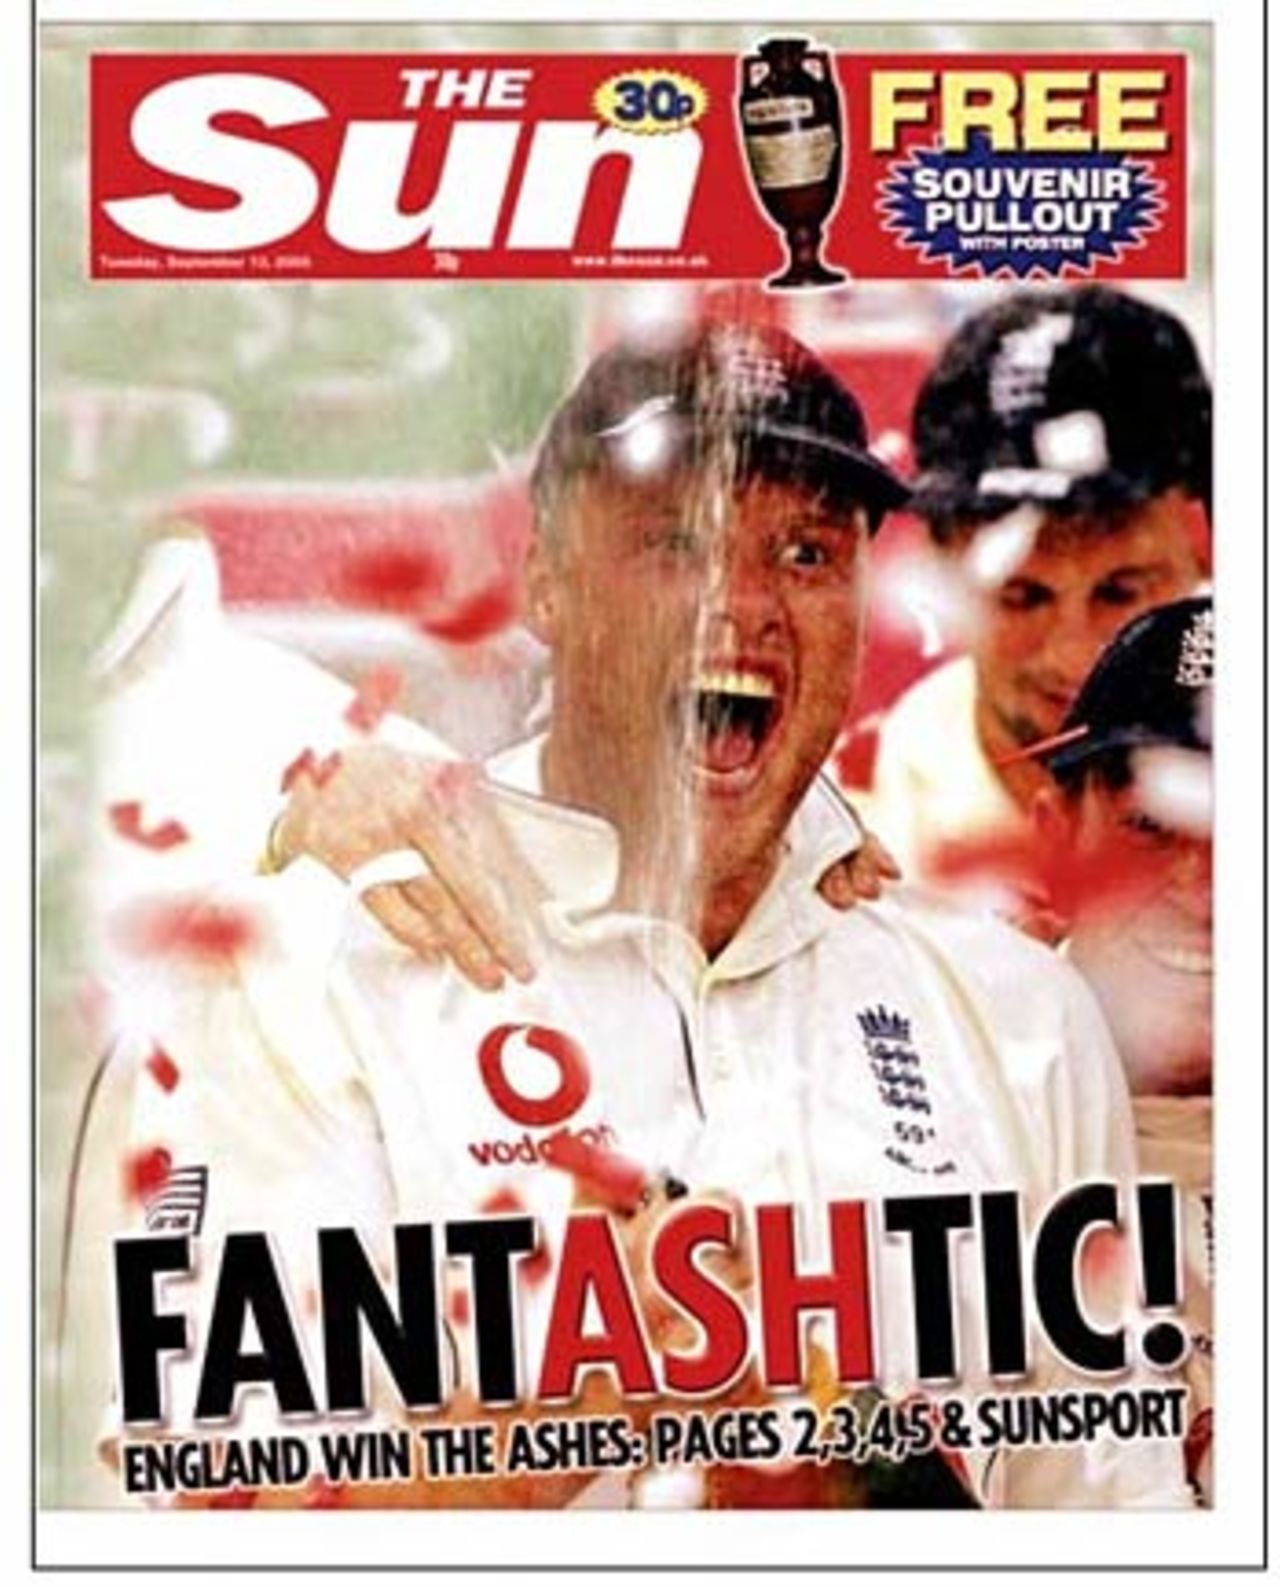 The front page of <I>The Sun</I>, September 13, 2005